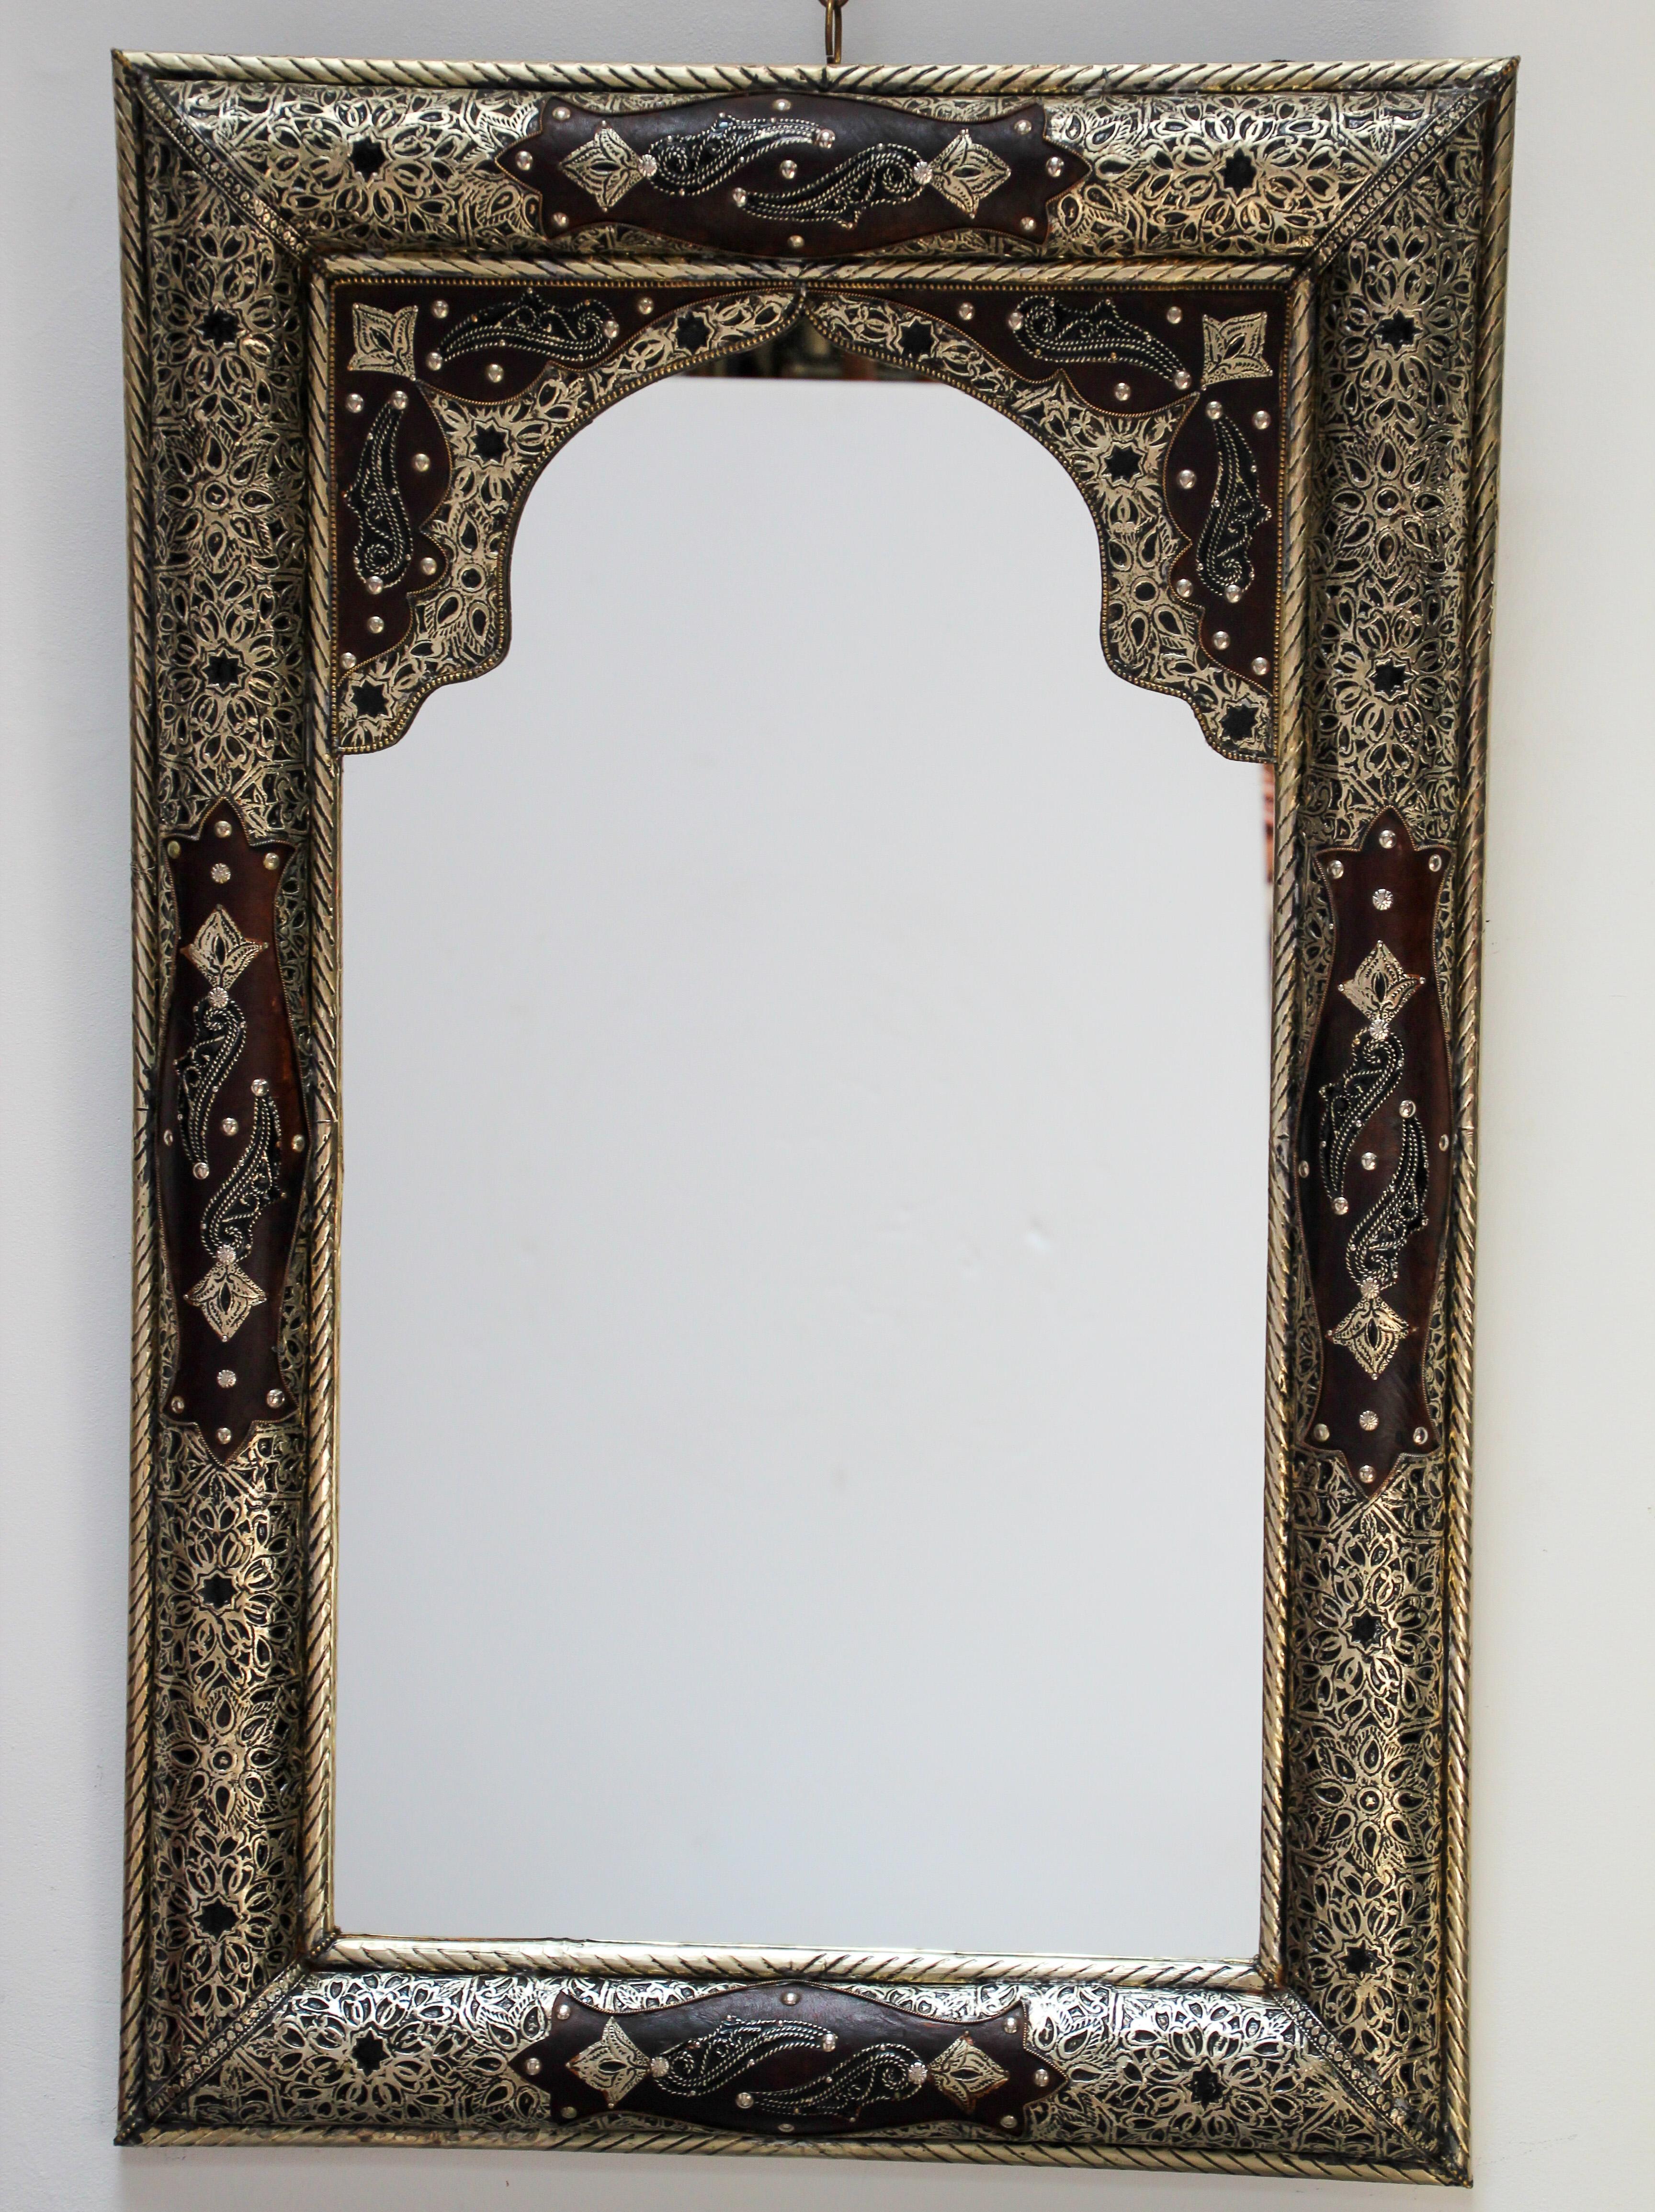 Moroccan mirror decorated with silvered hammered and repousse metal delicately engraved and wrapped with leather.
The inside mirror has a Moorish arch in leather and fine filigree silver décor.
Handcrafted rectangular Orientalist mirror.
Artisan